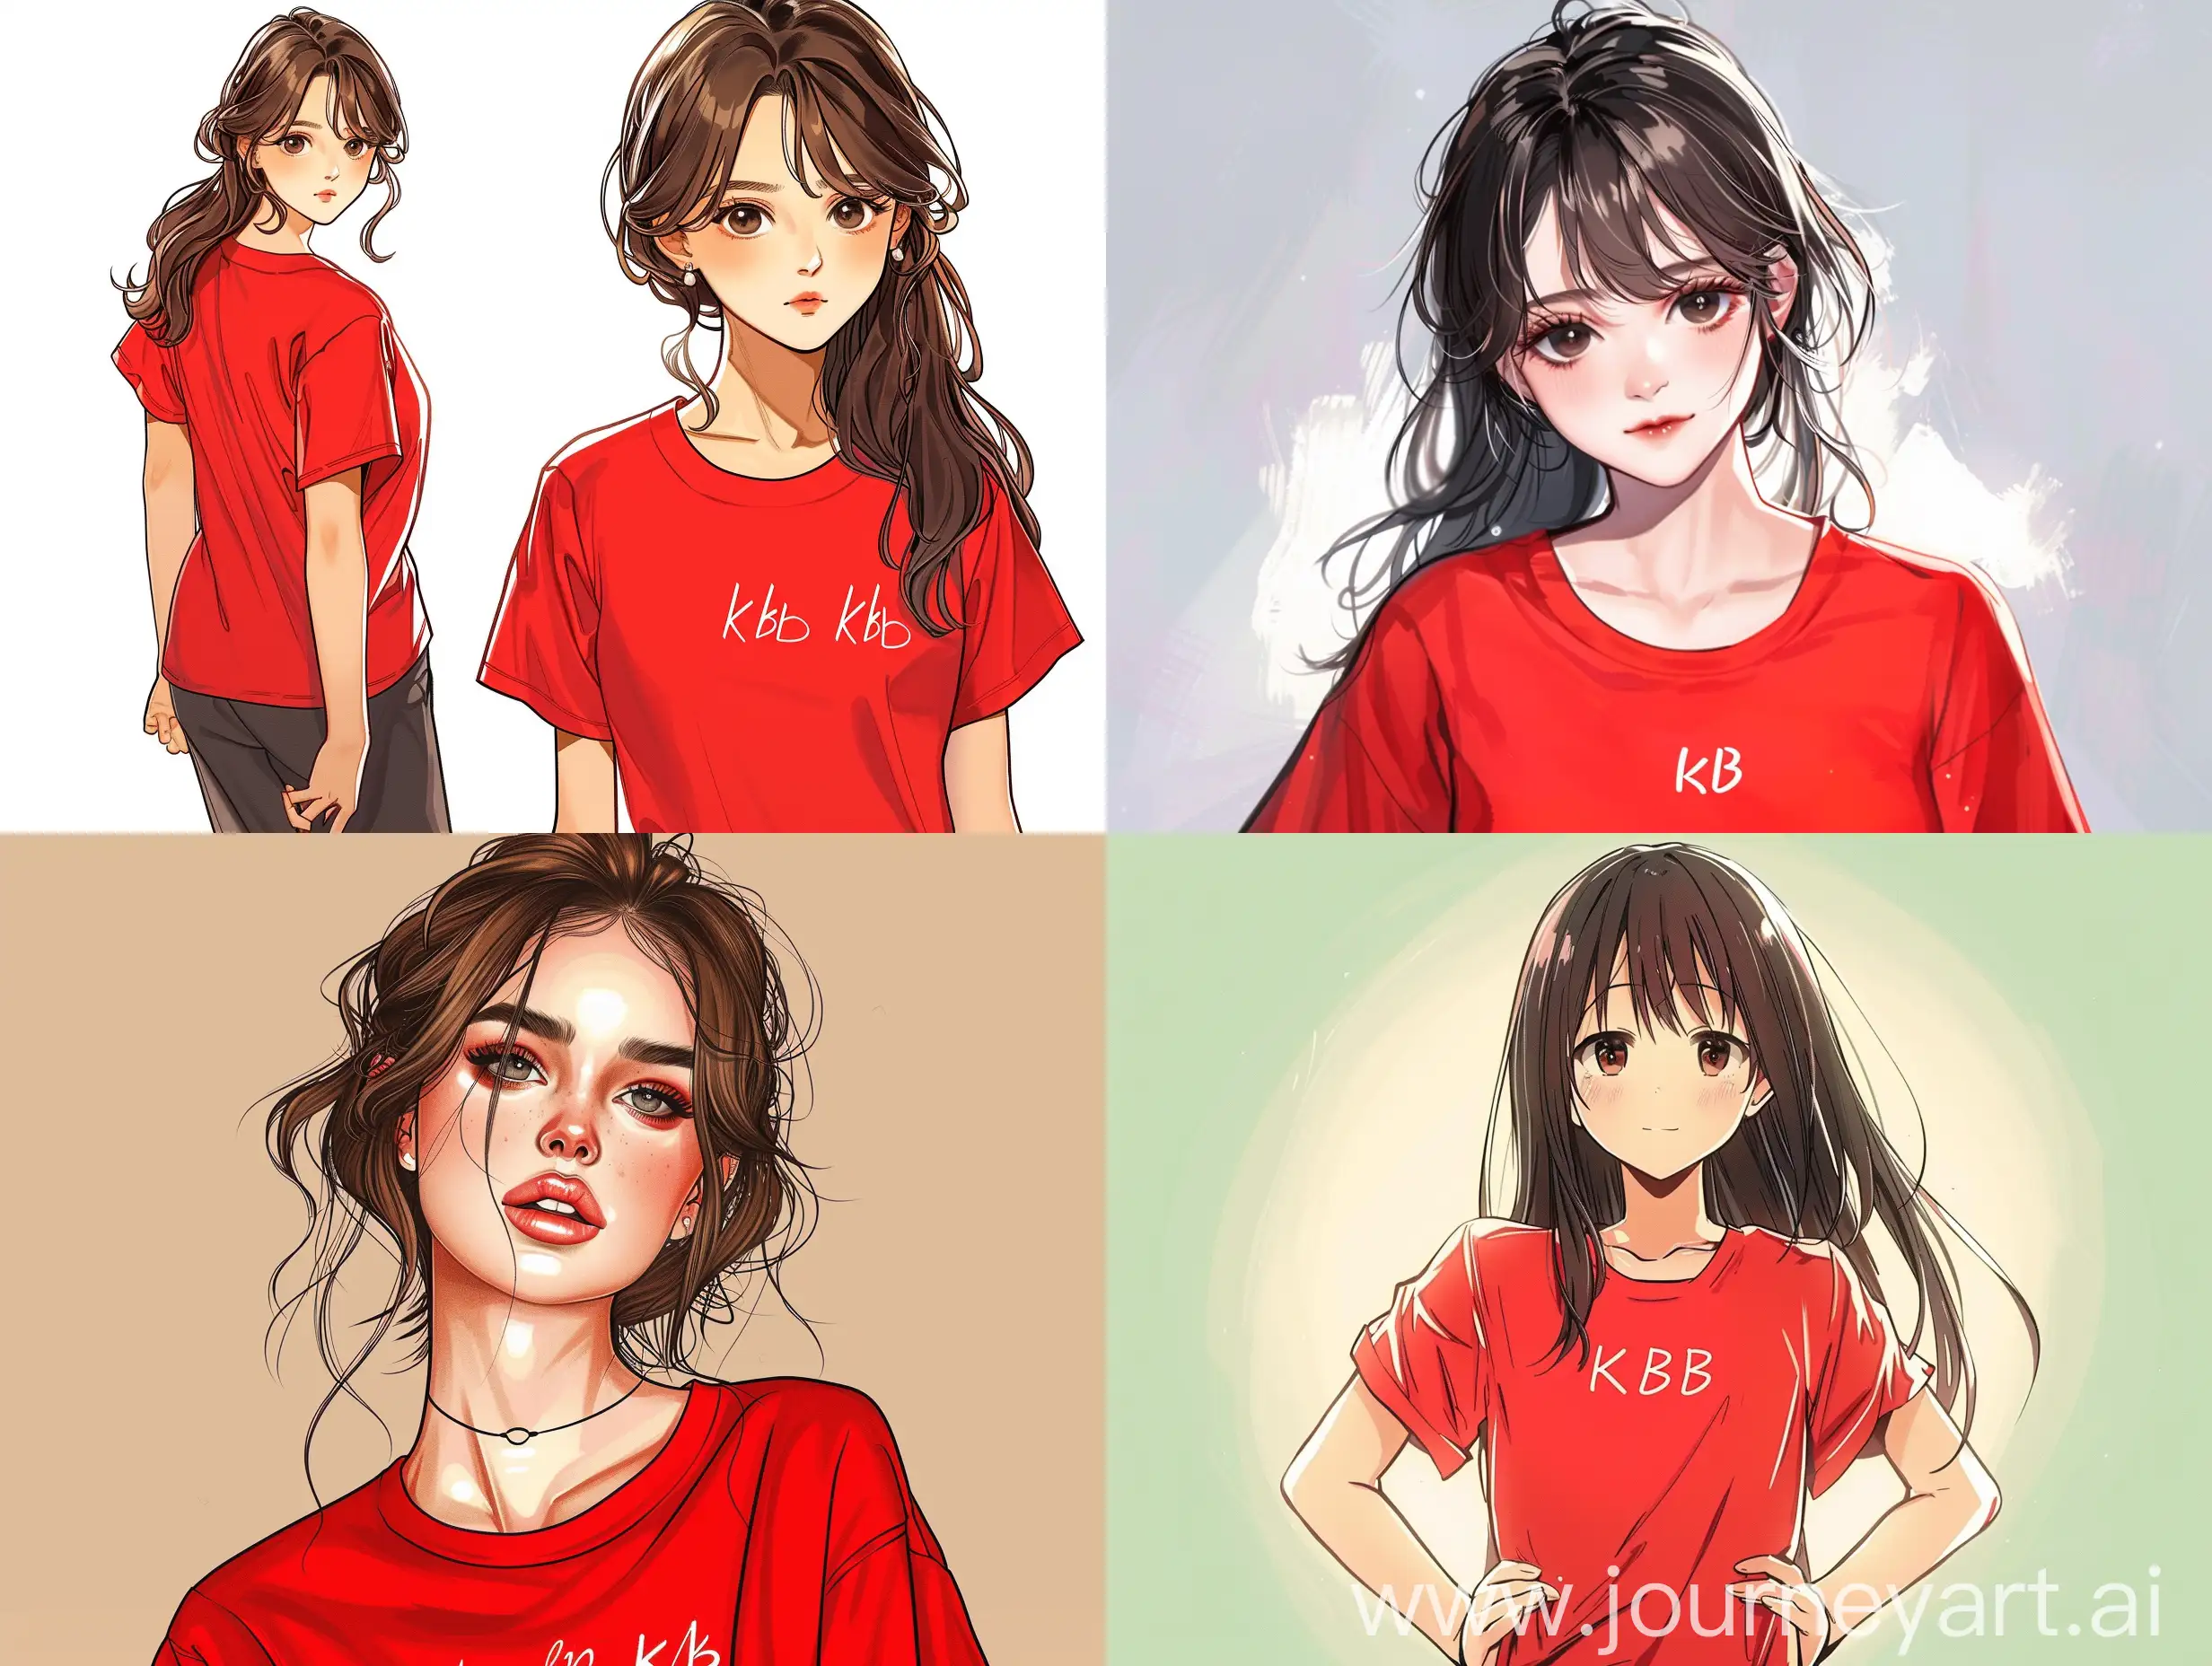 Draw a picture of a beautiful girl wearing red t-shirts written kb